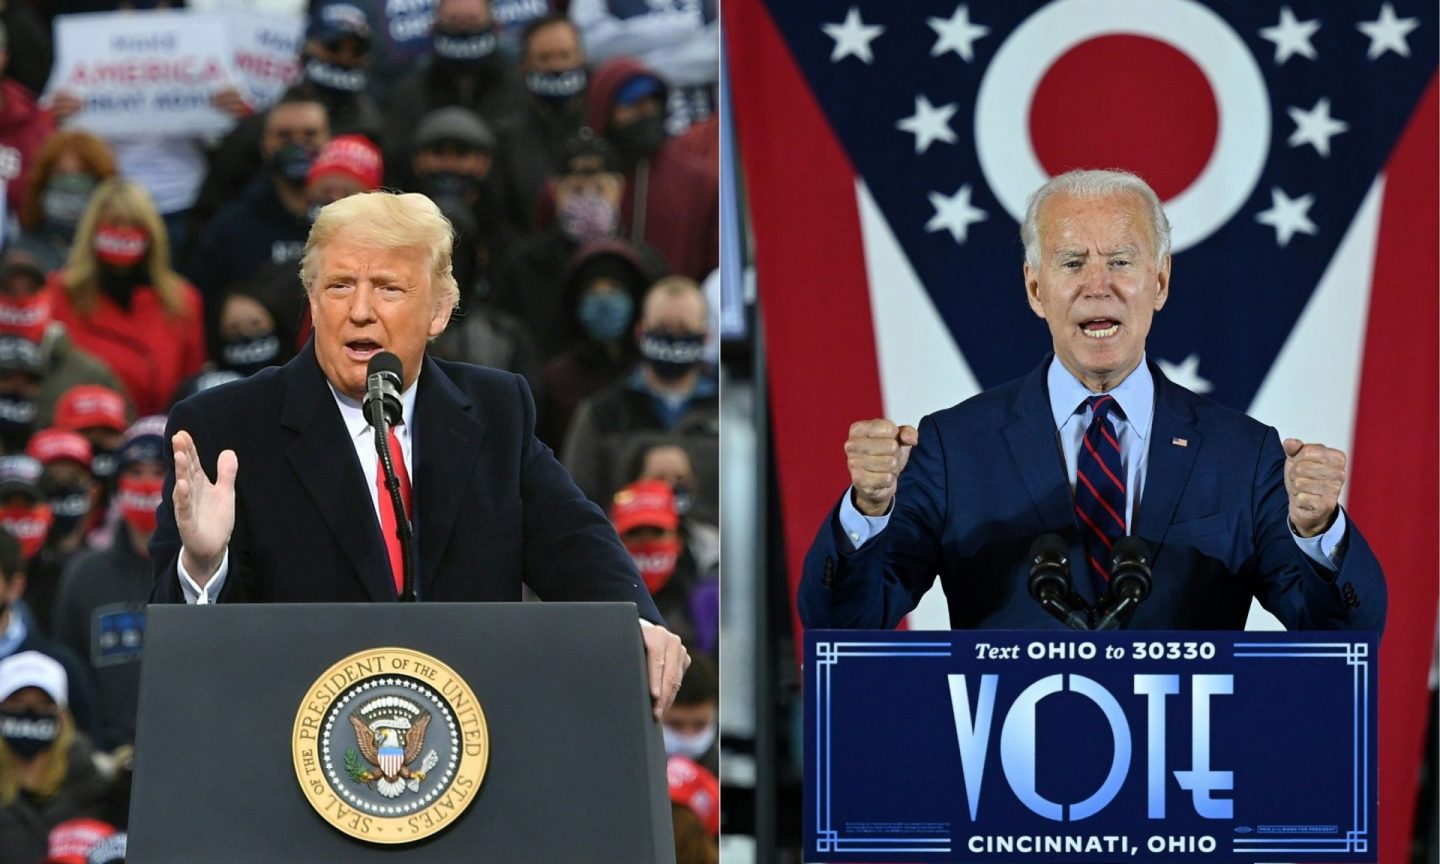 Donald Trump and Joe Biden at campaign rallies. Each man has a different approach to masculinity.